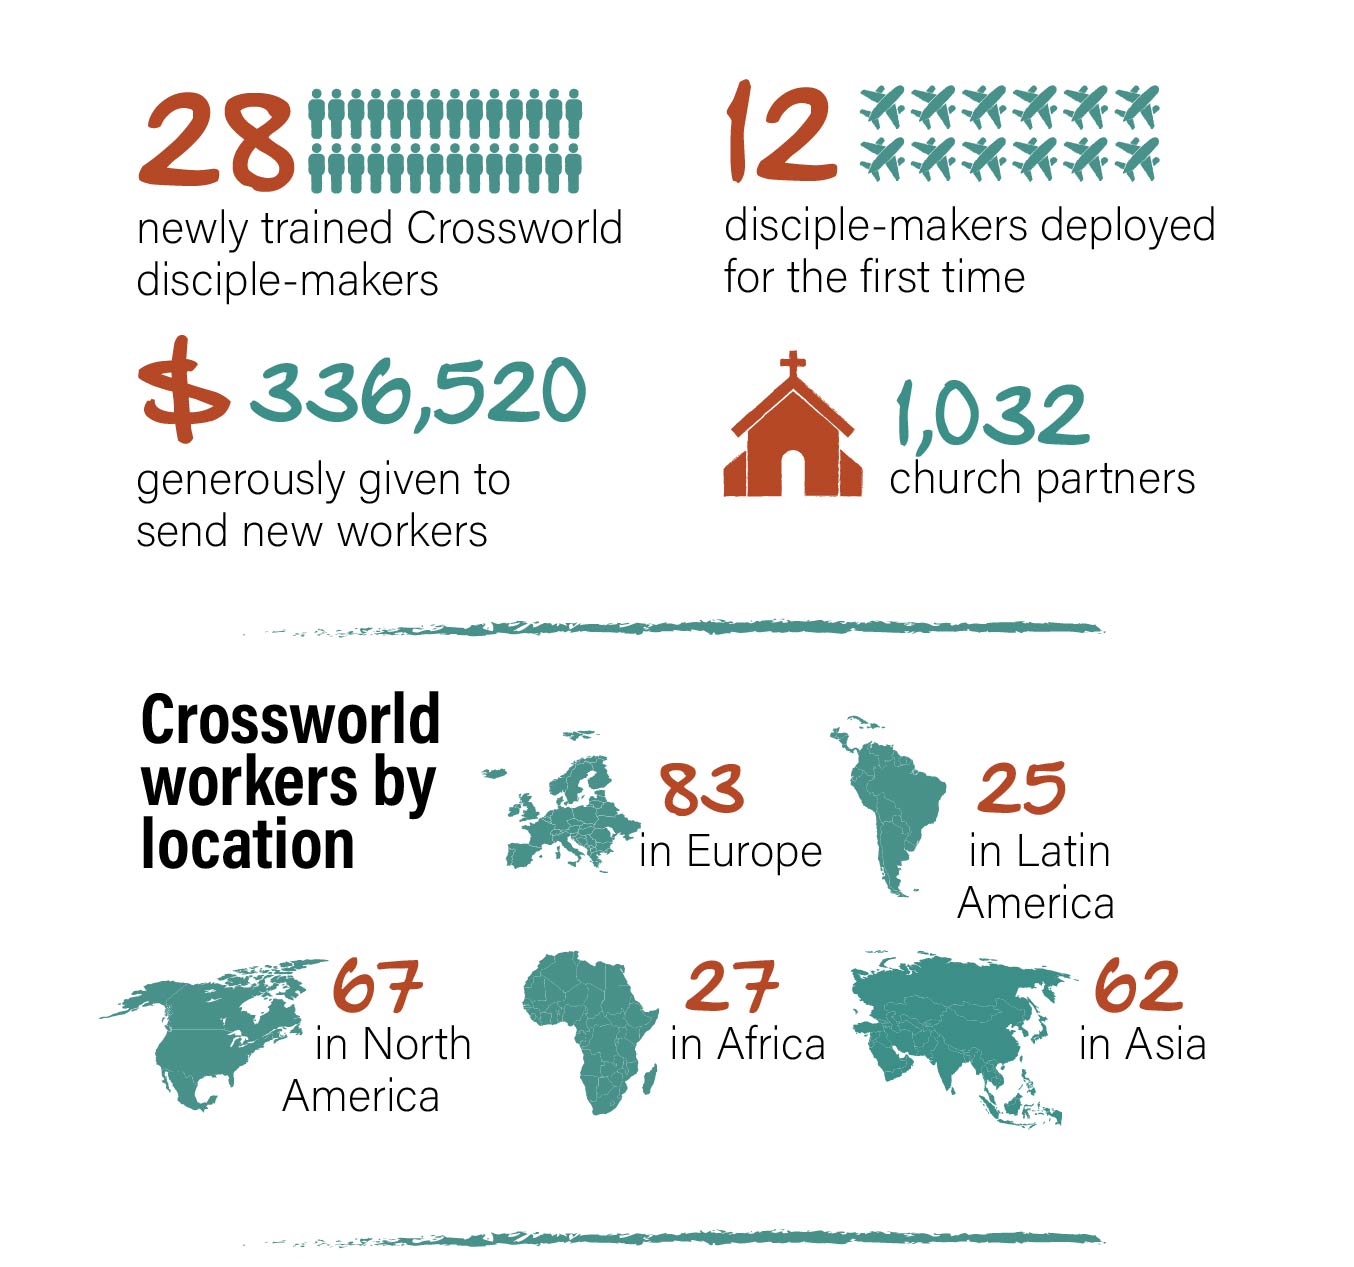 Crossworld new missionaries trained and sent plus missions giving and church partners